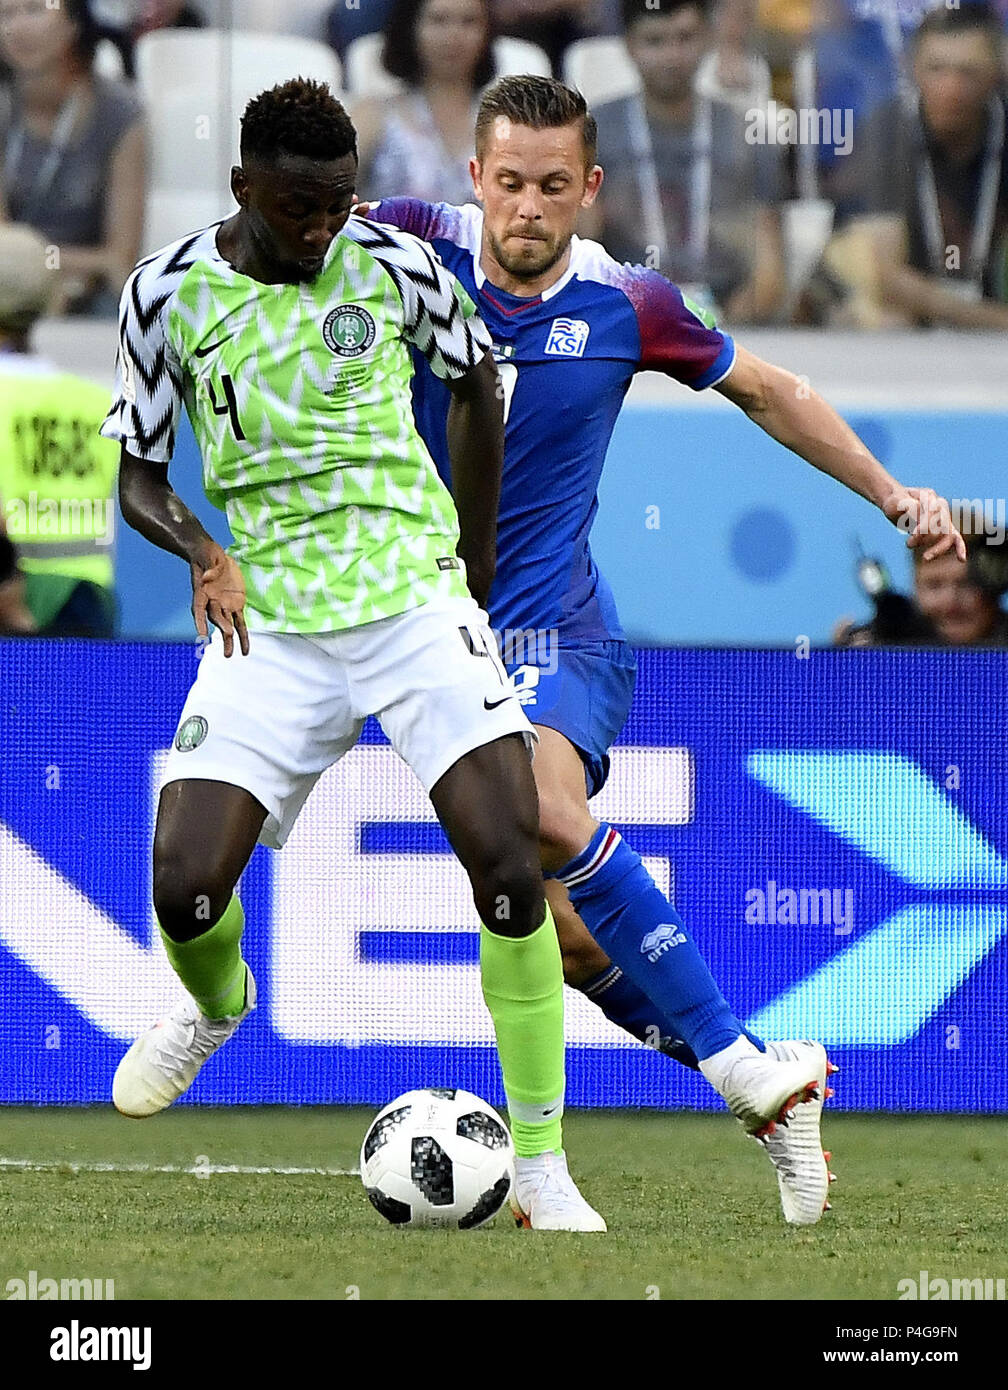 Volgograd, Russia. 22nd June, 2018. Wilfred Ndidi (L) of Nigeria vies with Gylfi Sigurdsson of Iceland during the 2018 FIFA World Cup Group D match between Nigeria and Iceland in Volgograd, Russia, June 22, 2018. Credit: He Canling/Xinhua/Alamy Live News Stock Photo